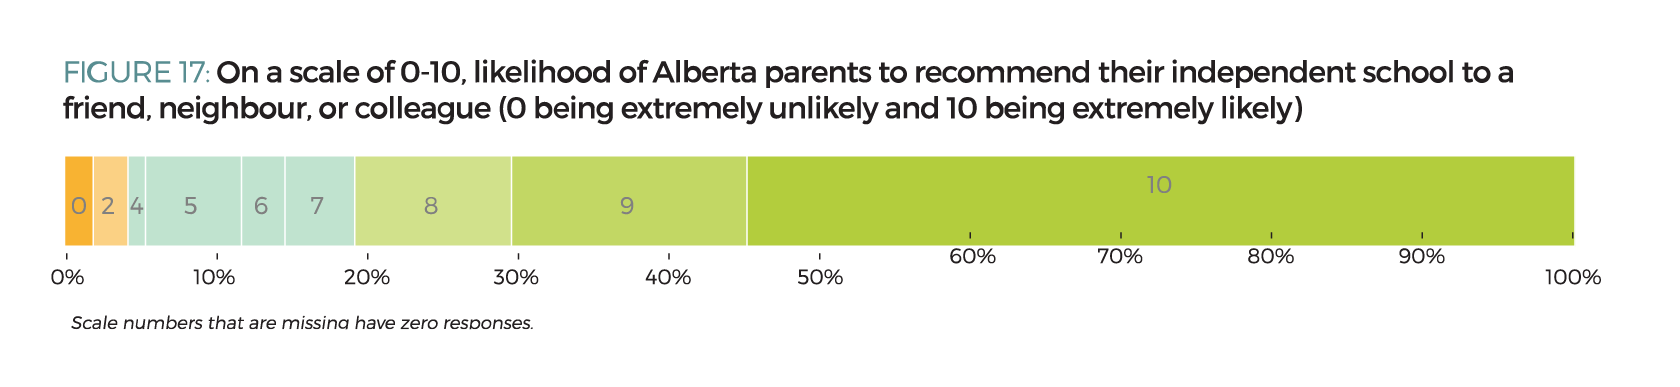 Figure 17. On a scale of 0-10, likelihood of Alberta parents to recommend their independent school to a friend, neighbour, or colleague (0 being extremely unlikely and 10 being extremely likely)